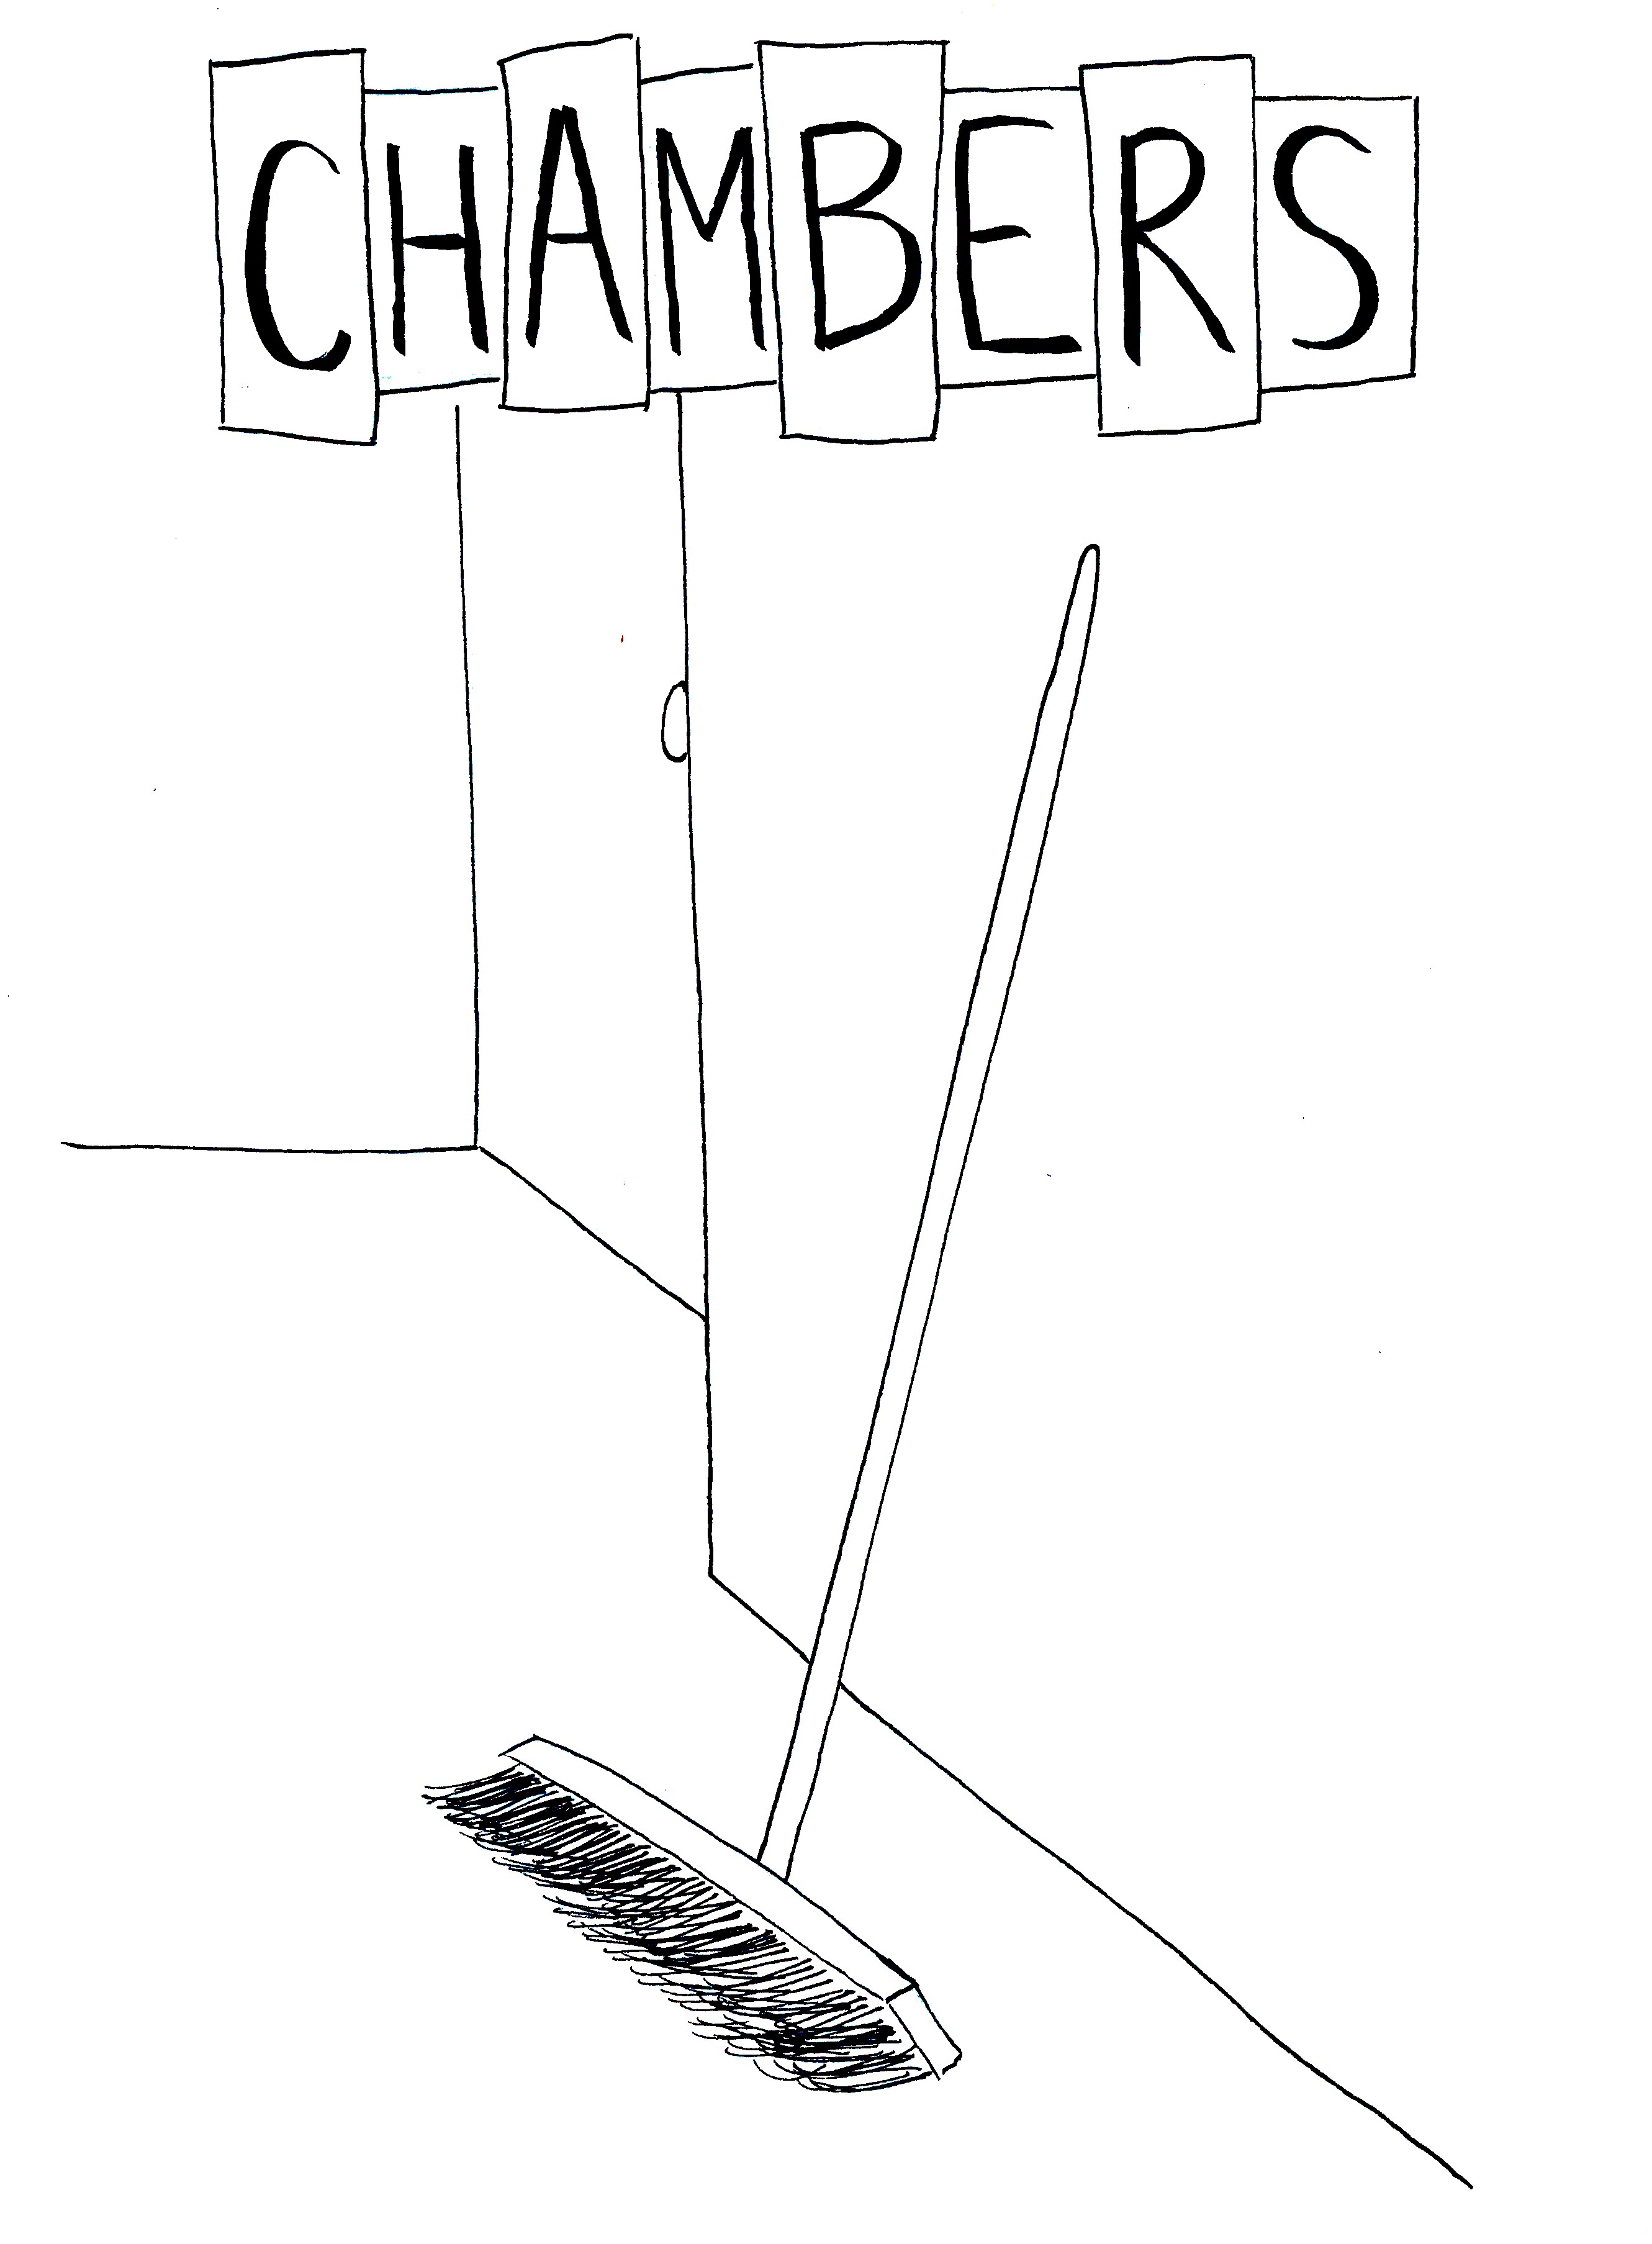 If you are allergic to looking at brooms, this might not be the comic for you.